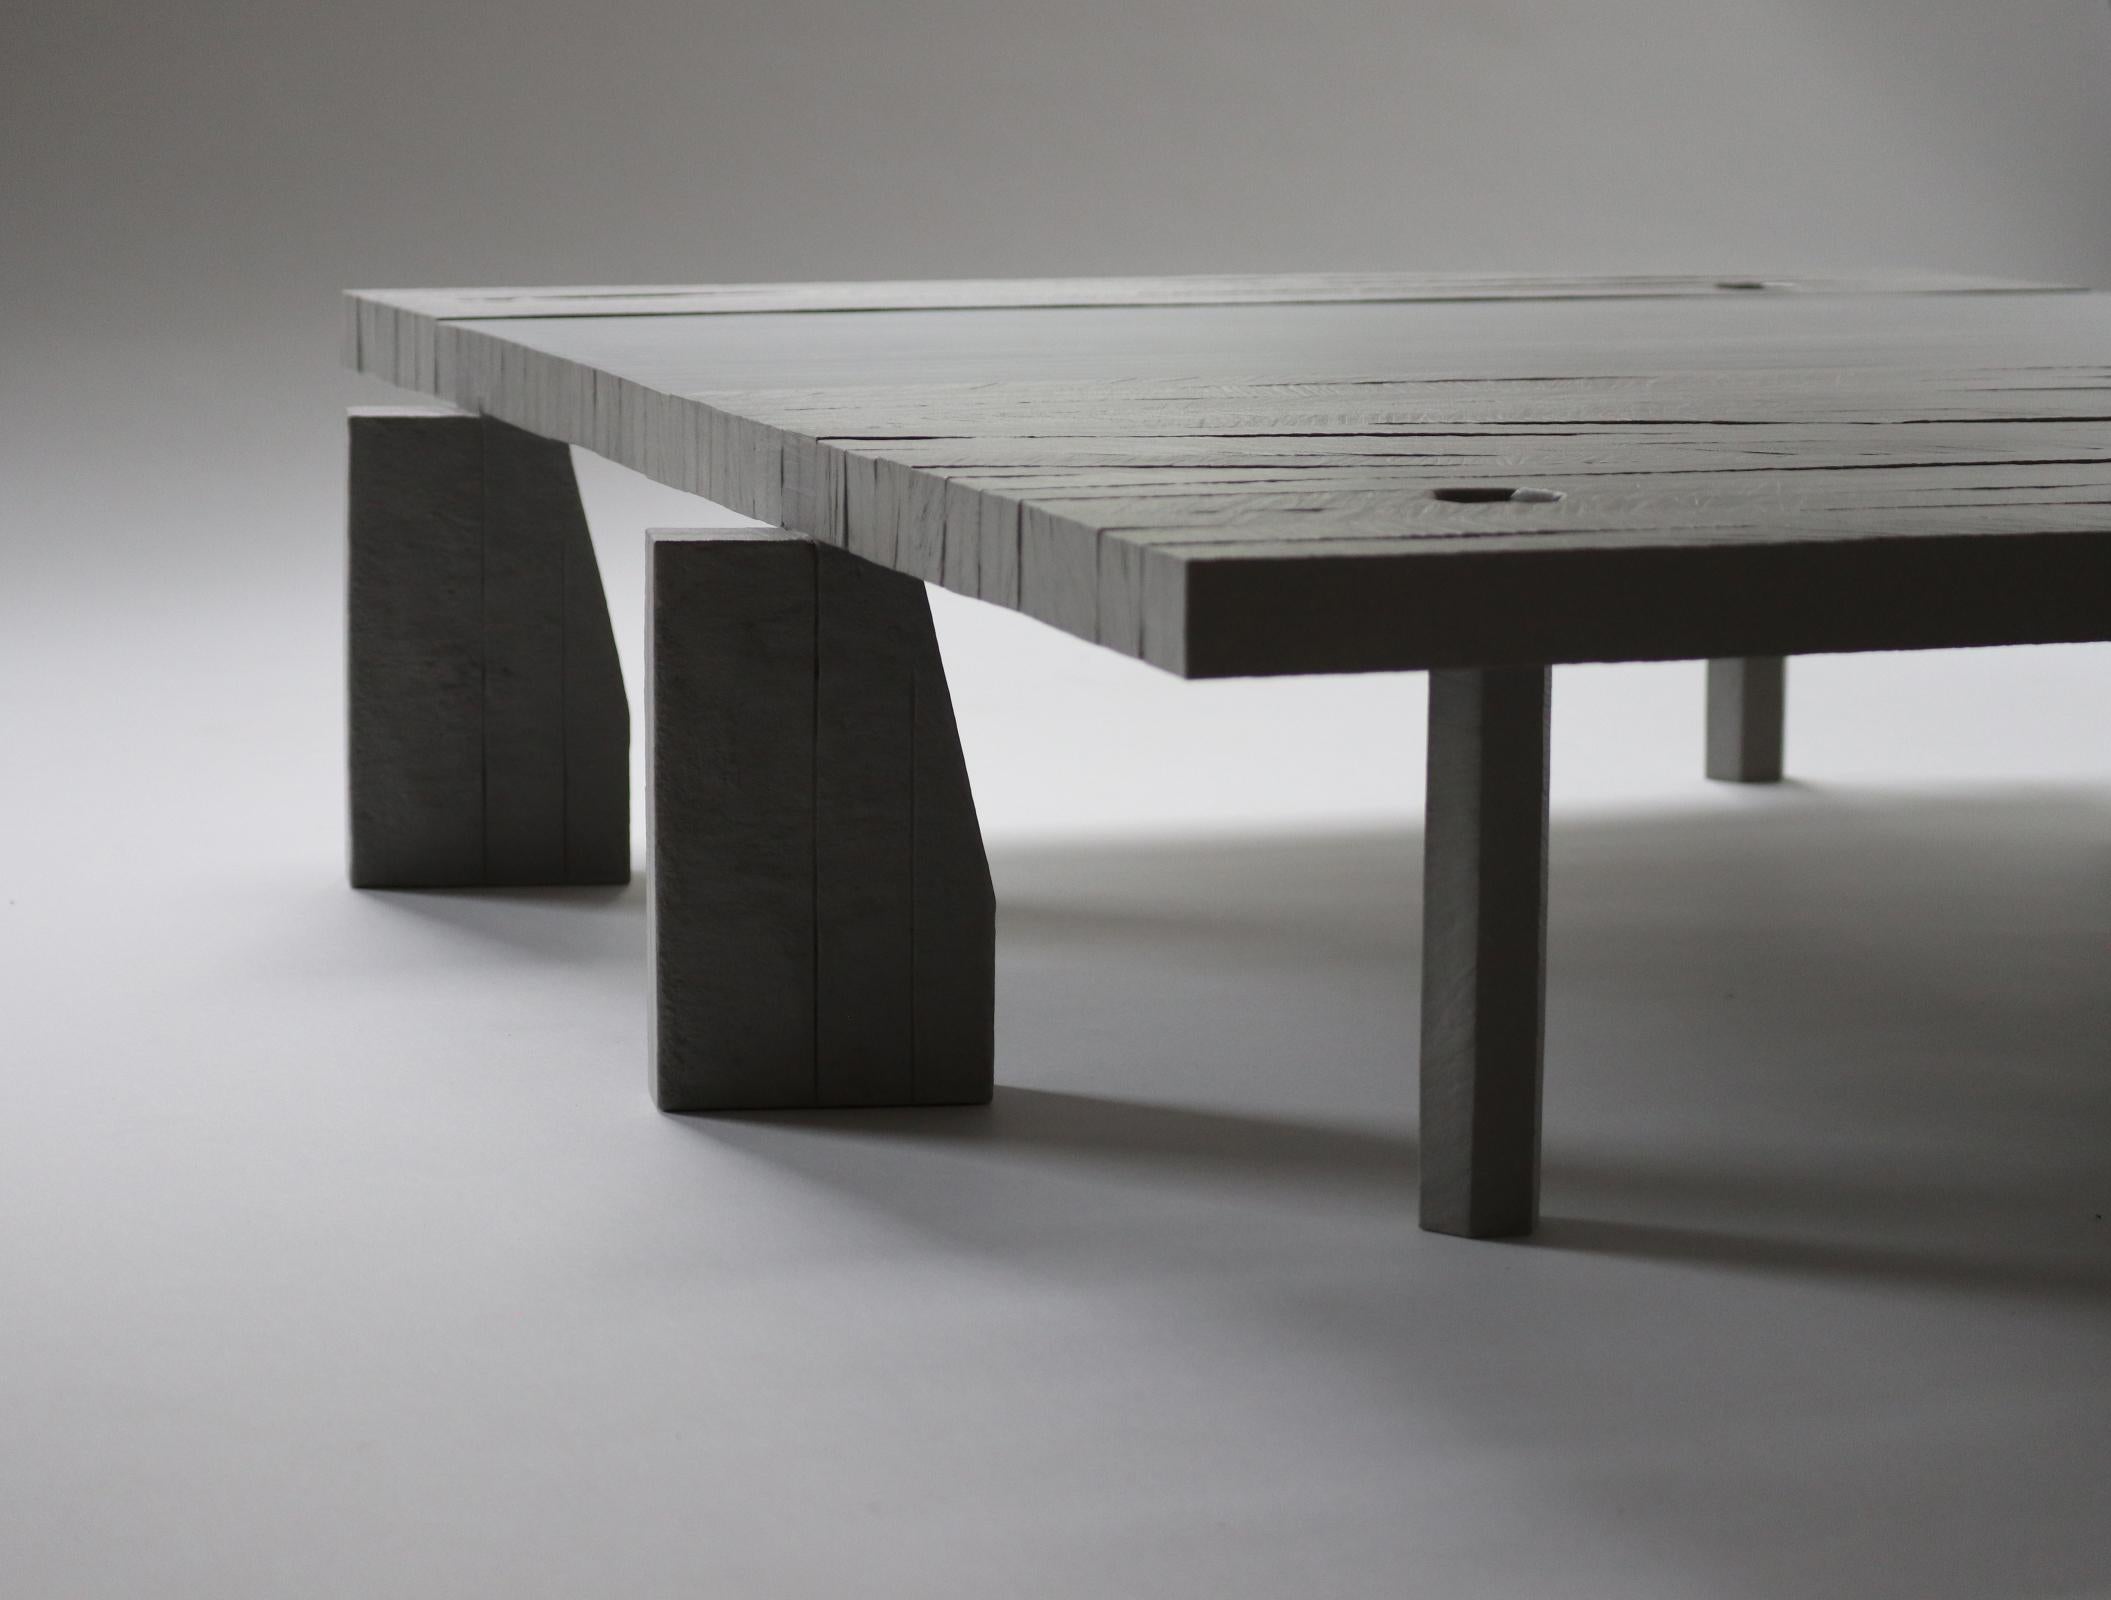 Hand-Crafted Wooden Table, 'BRUTALISTA 01' by Marc Meeuwissen For Sale 1